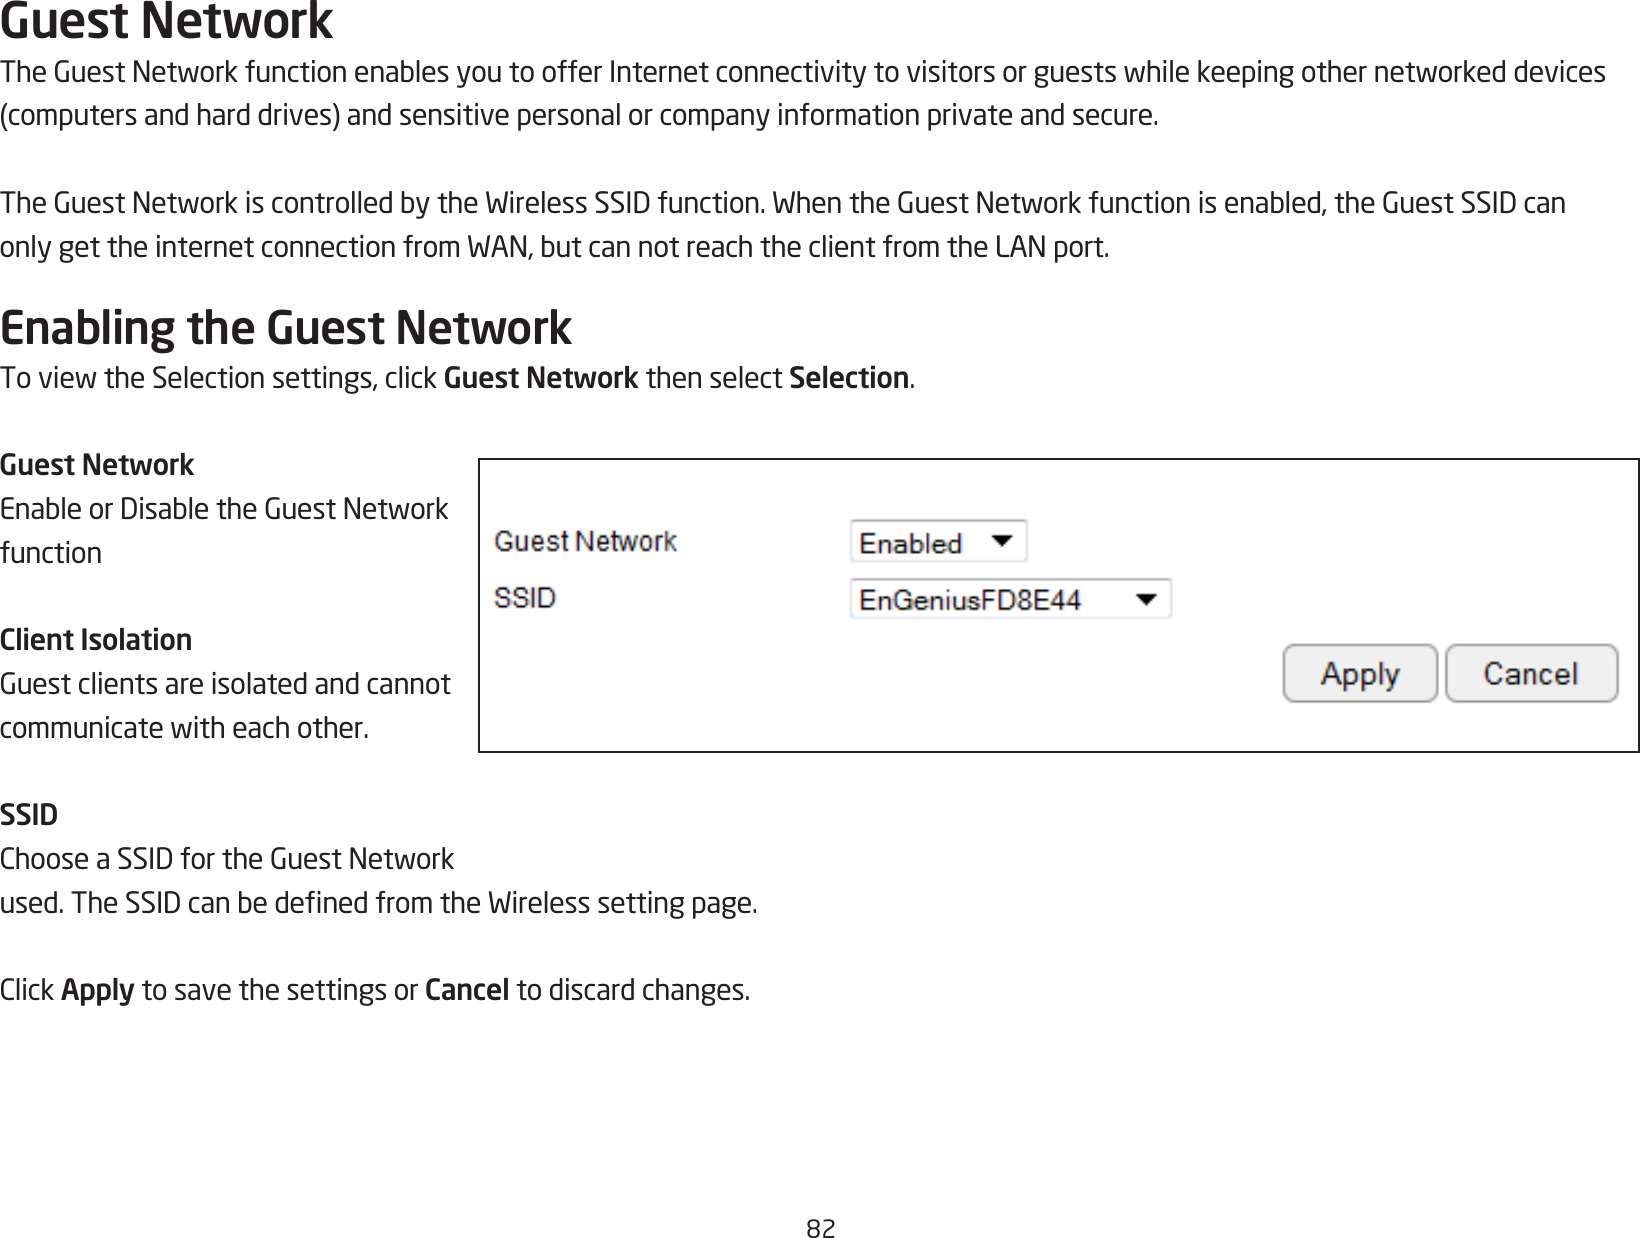 82Guest NetworkTheGuestNetworkfunctionenablesyoutoofferInternetconnectivitytovisitorsorguestswhilekeepingothernetworkeddevices(computersandharddrives)andsensitivepersonalorcompanyinformationprivateandsecure.TheGuestNetworkiscontrolledbytheWirelessSSIDfunction.WhentheGuestNetworkfunctionisenabled,theGuestSSIDcanonlygettheinternetconnectionfromWAN,butcannotreachtheclientfromtheLANport.Enabling the Guest NetworkToviewtheSelectionsettings,clickGuest Network then select Selection.Guest NetworkEnableorDisabletheGuestNetworkfunctionClient IsolationGuestclientsareisolatedandcannotcommunicatewitheachother.SSIDChooseaSSIDfortheGuestNetworkused.TheSSIDcanbedenedfromtheWirelesssettingpage.ClickApply to save the settings or Cancel to discard changes.